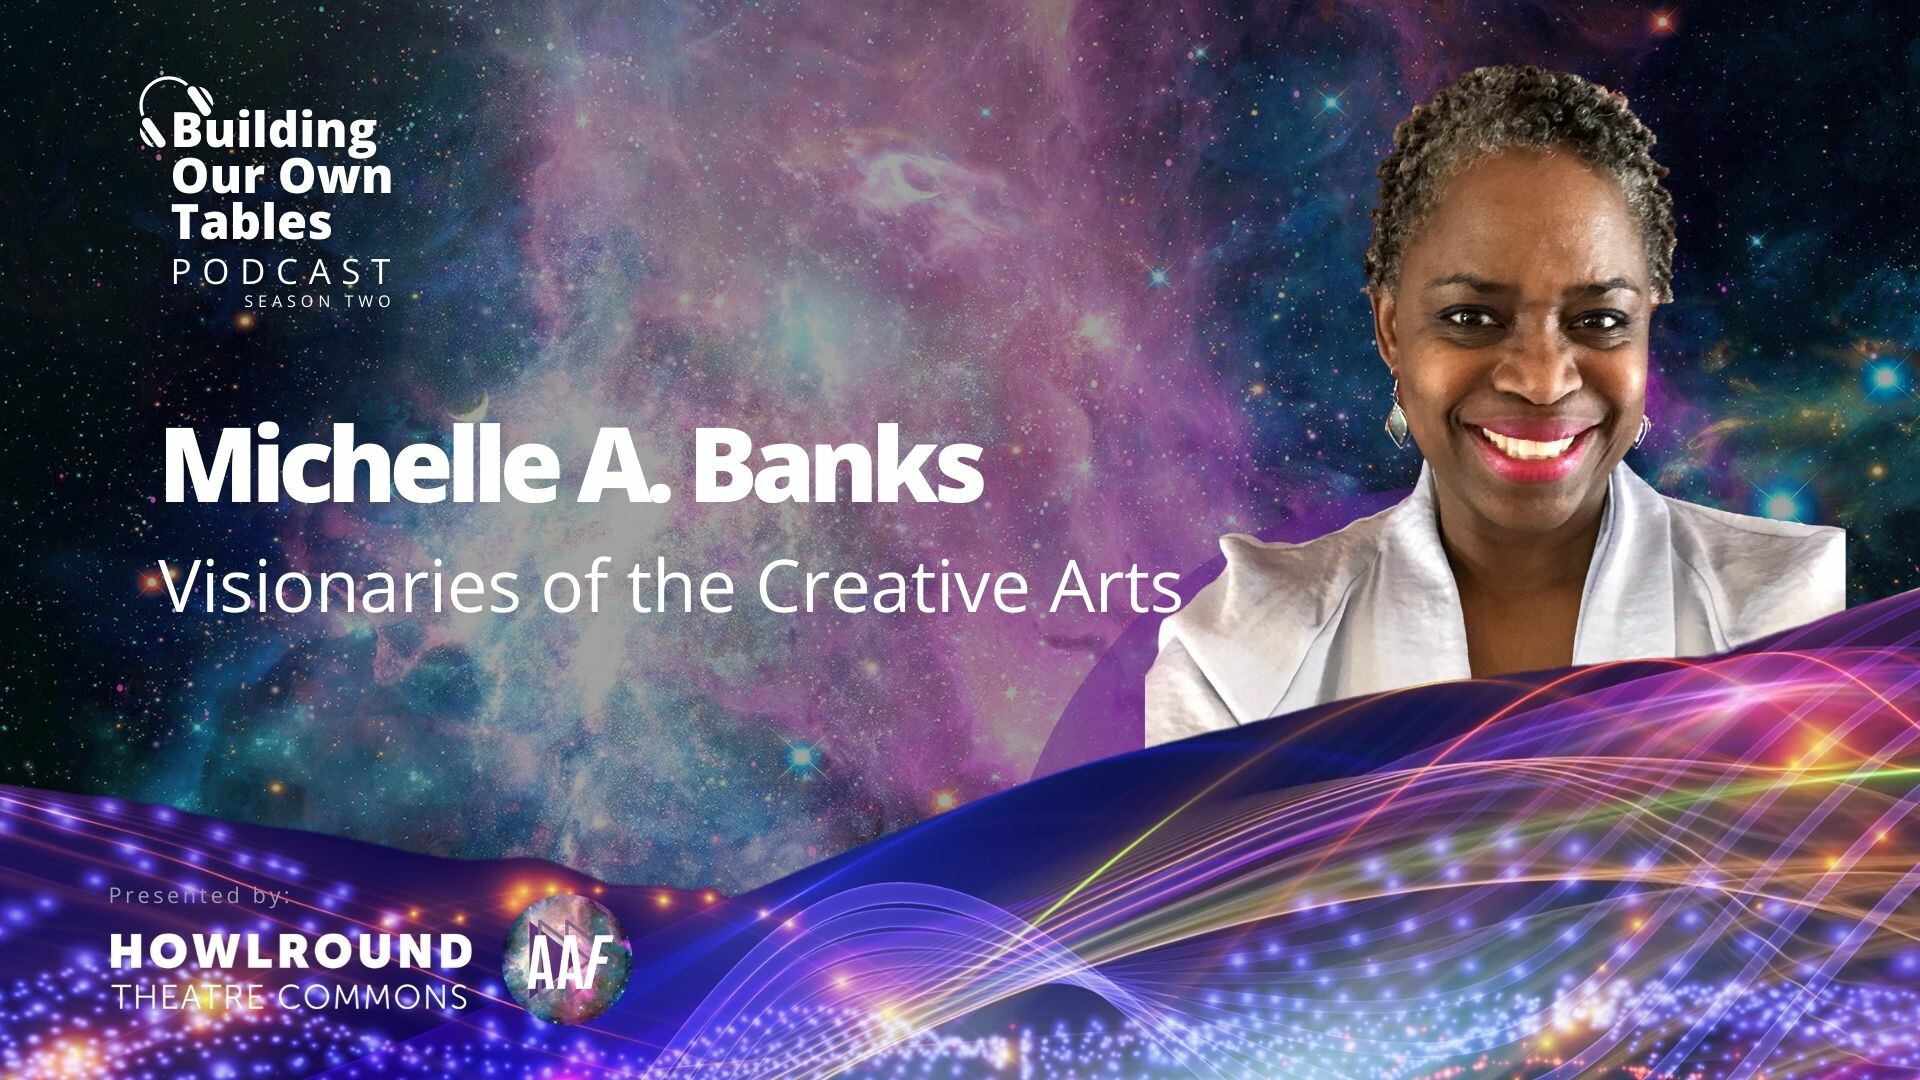 A headshot of Michelle A. Banks against a galaxy backdrop with the logo for Building Our Own Tables to the left.